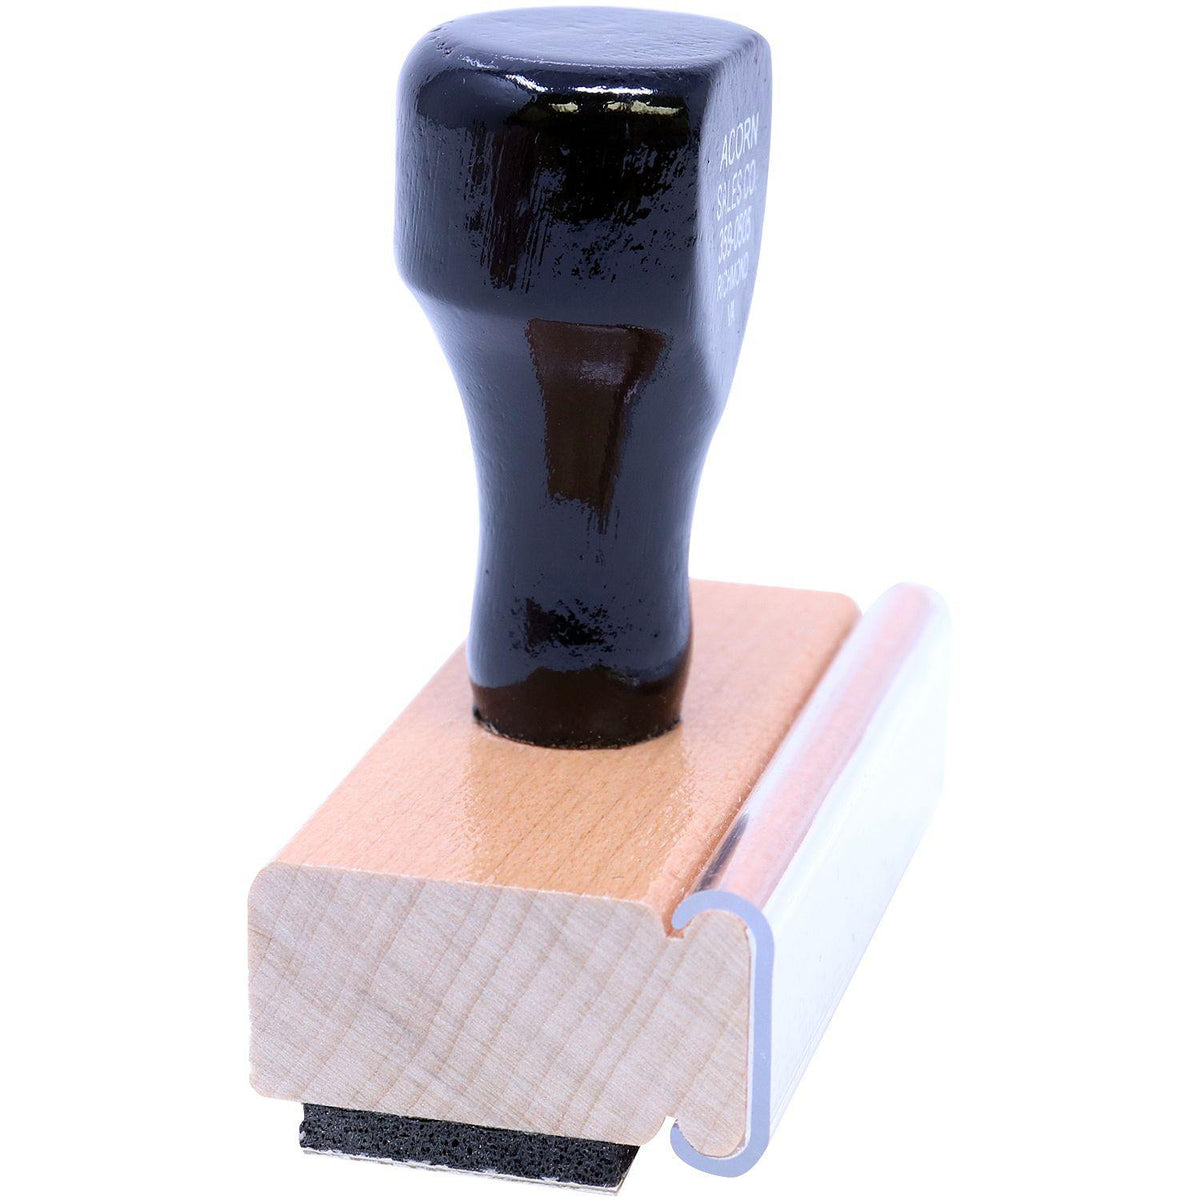 Side View of Large Italic Personal Confidential Rubber Stamp at an Angle